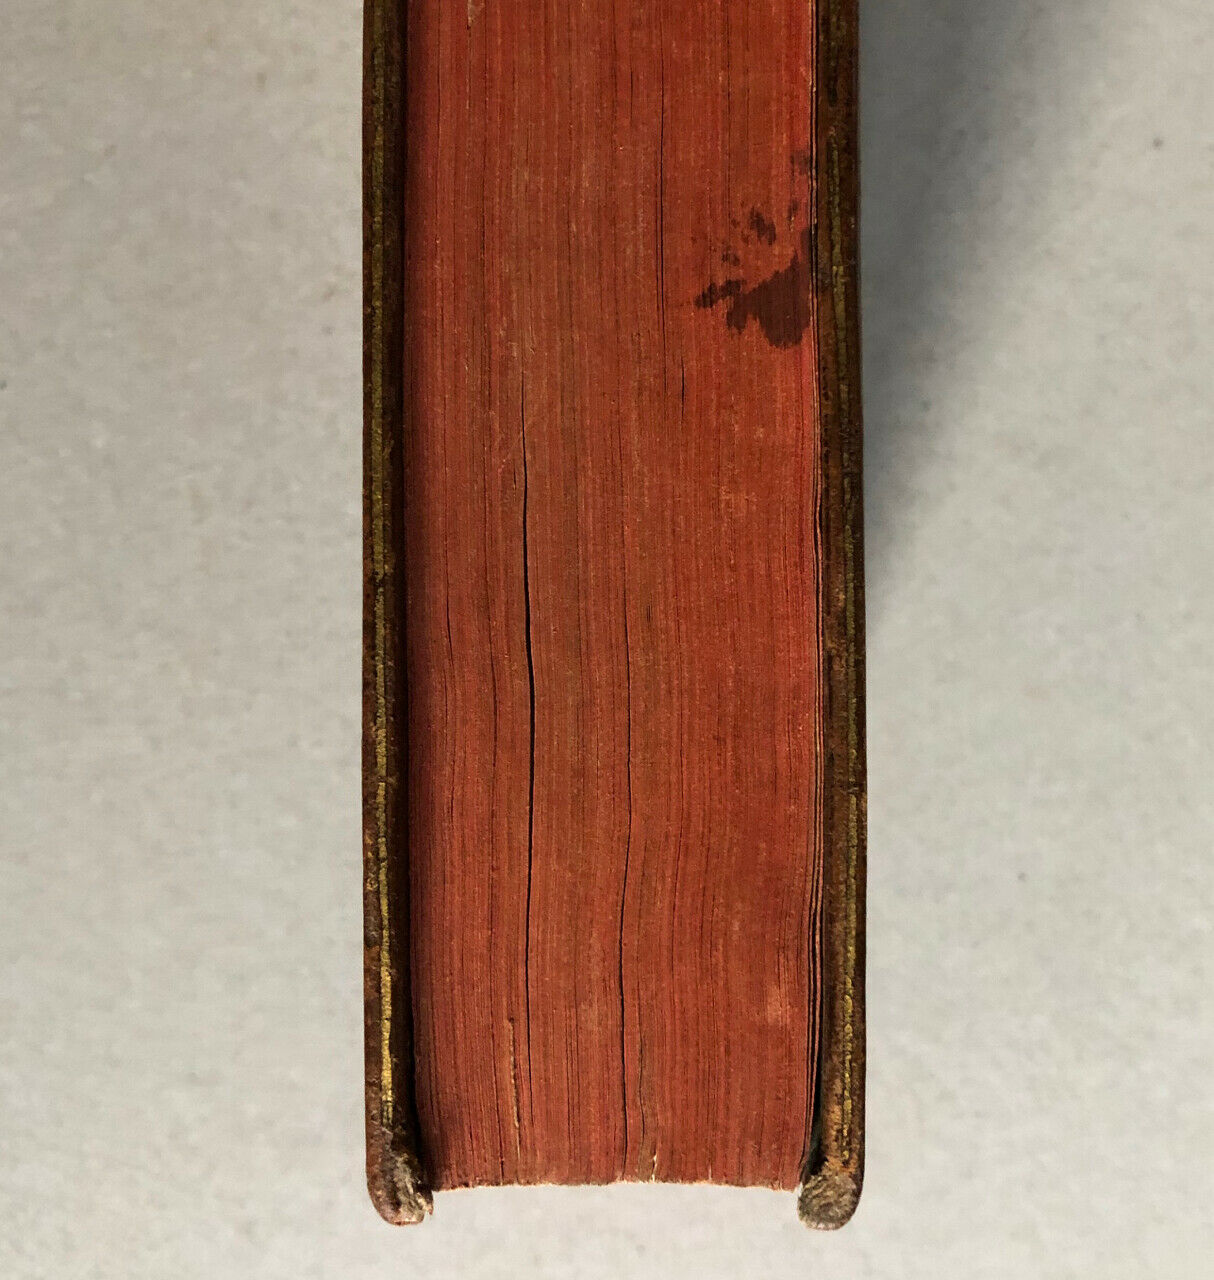 ES Rowe — Friendship after Death — first edition — arms binding — 1740